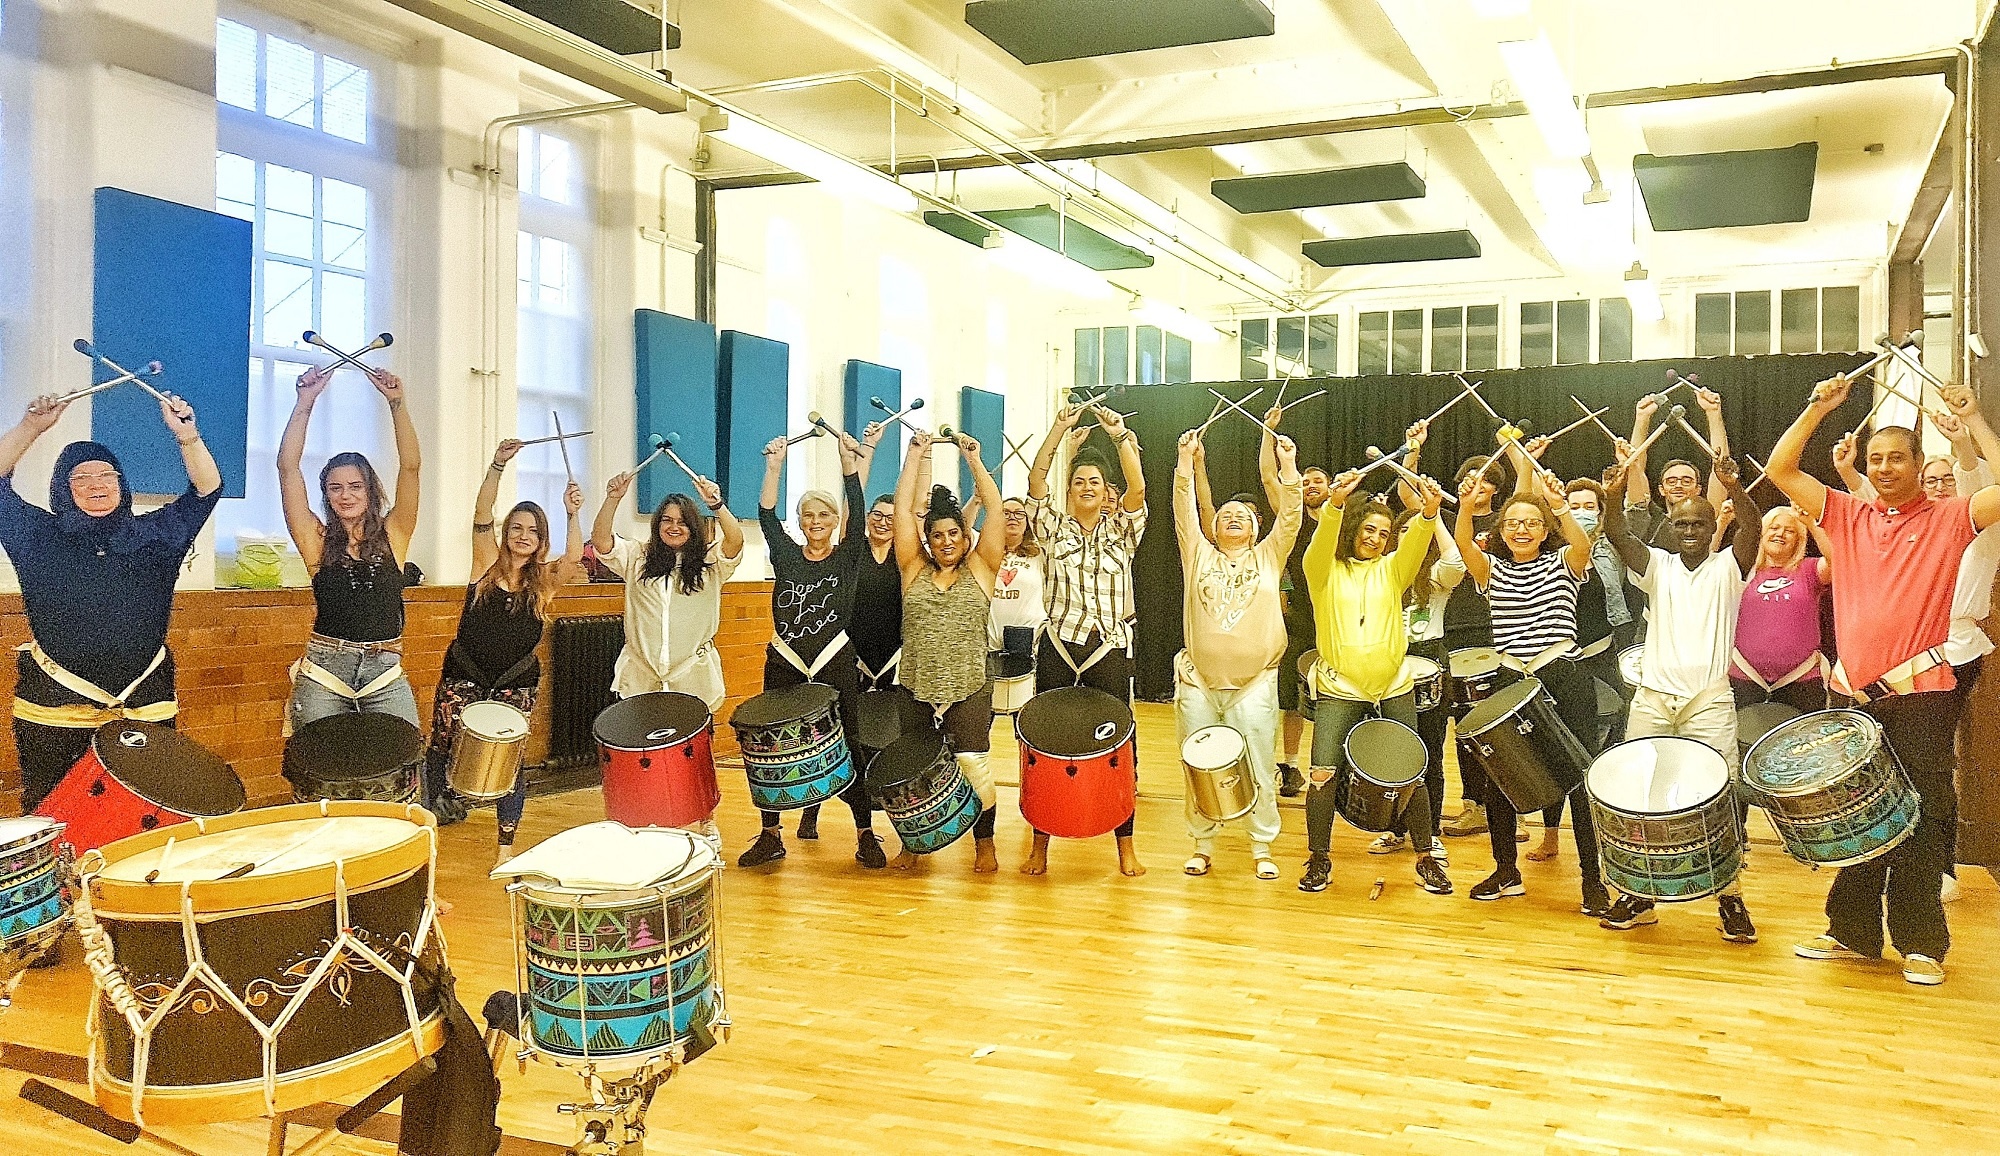 Drumming Group Liverpool - 